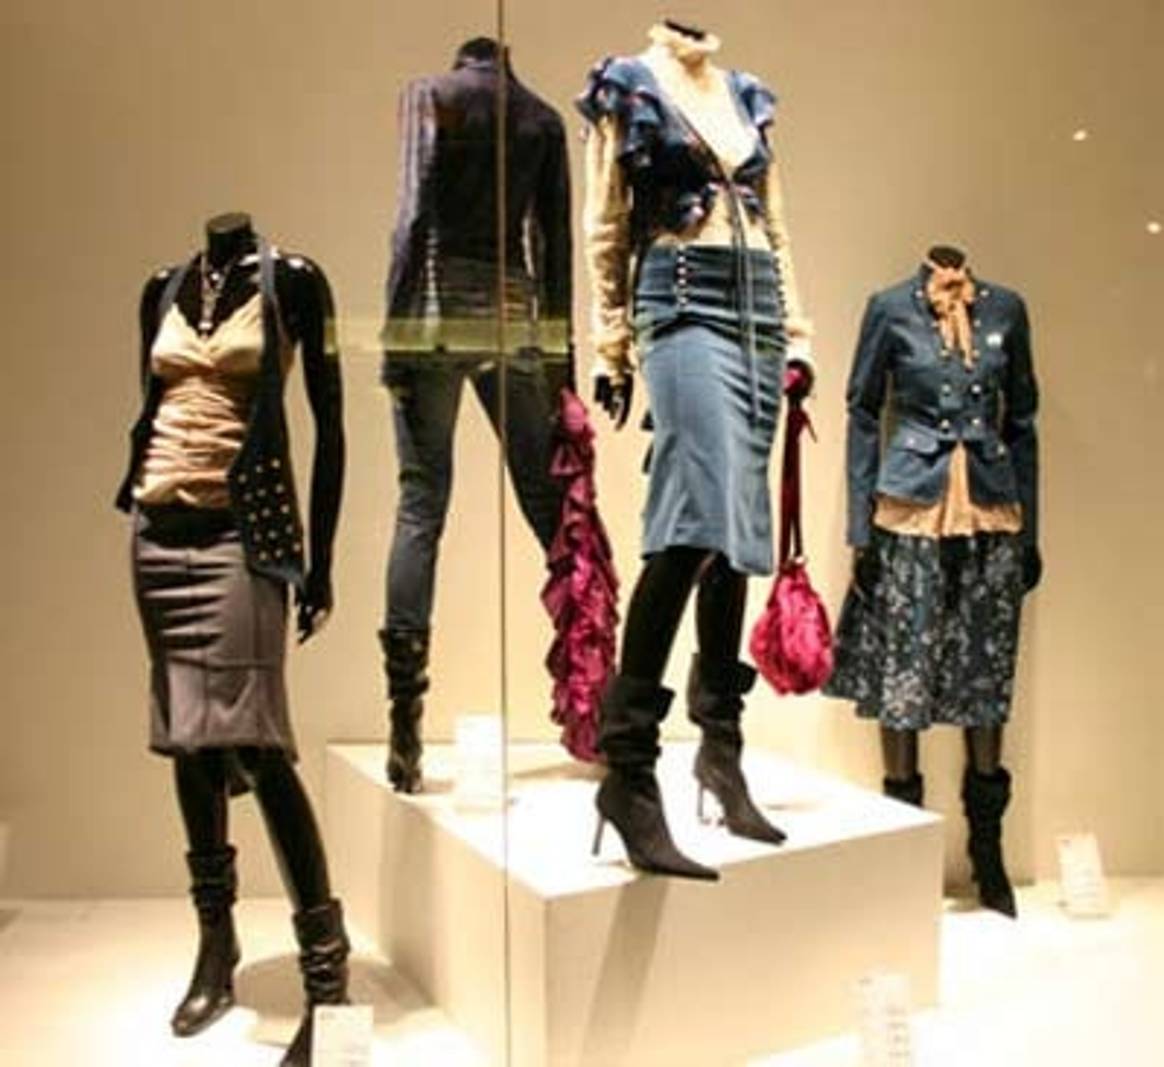 Mannequins help boost sales say retailers and brands